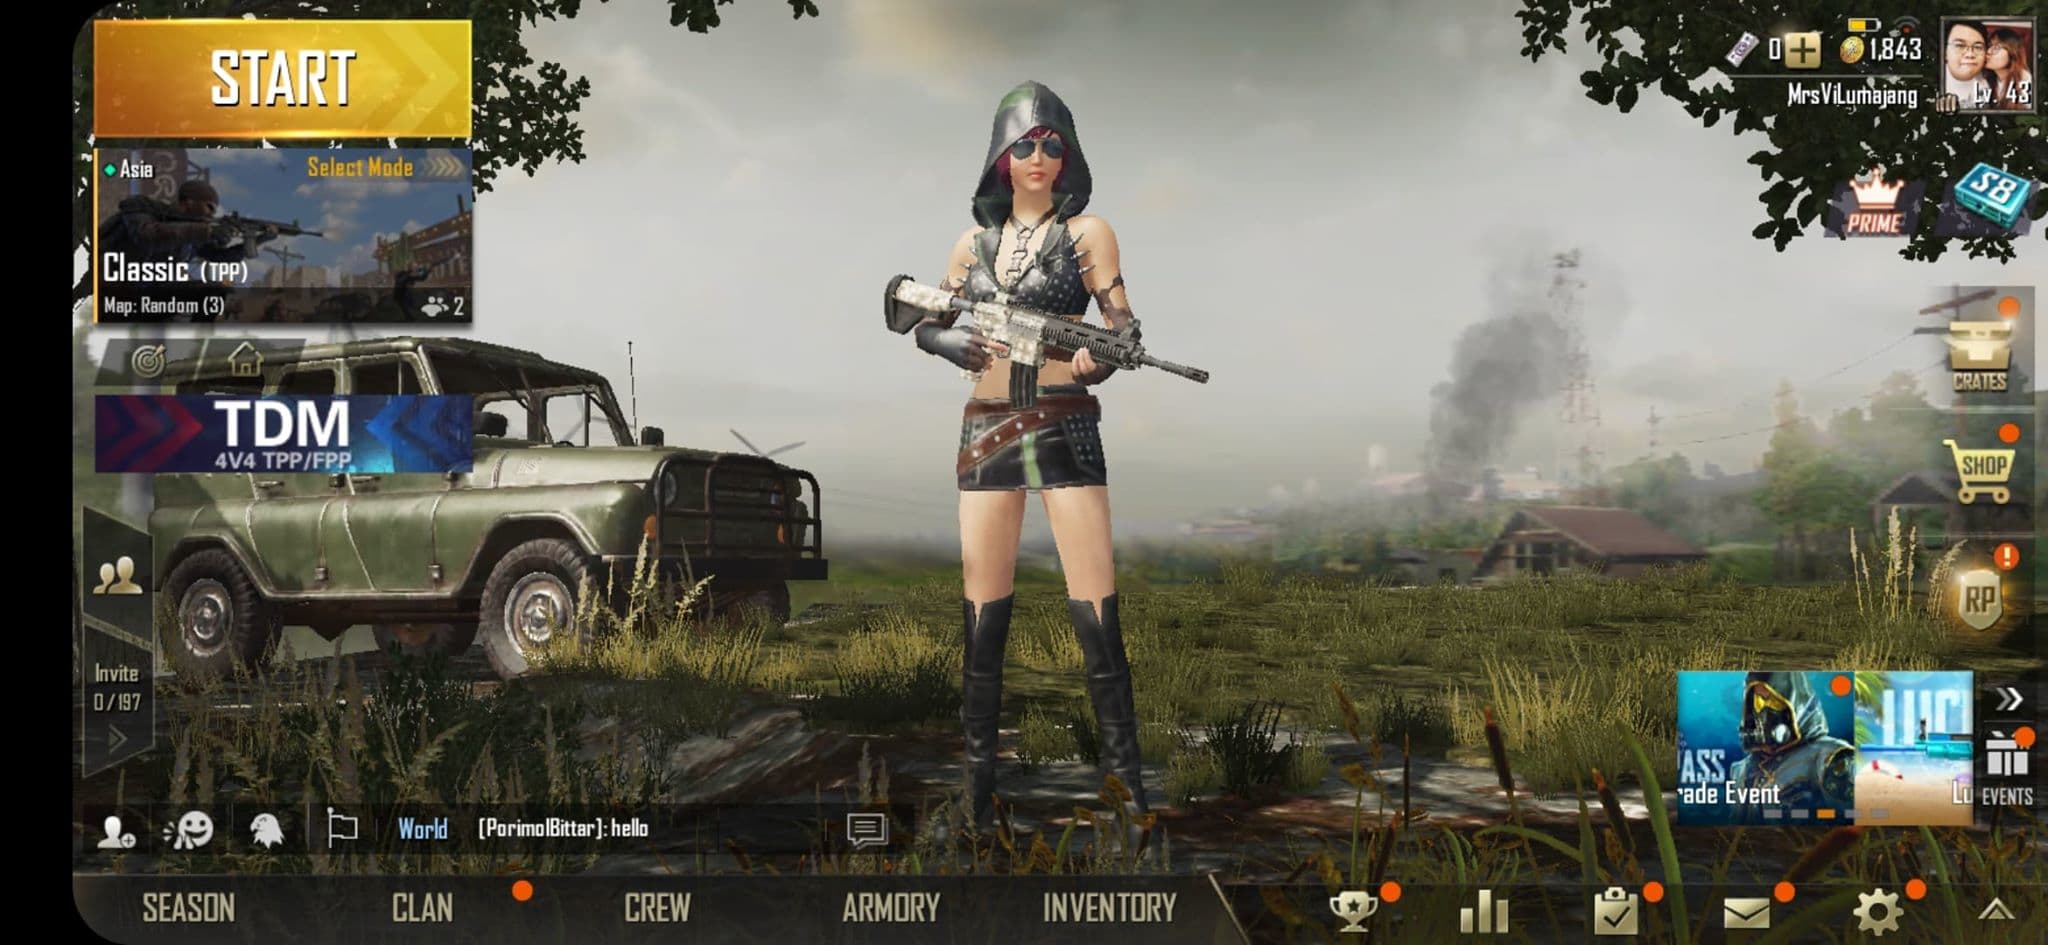 Play Pubg Mobile With You Long Term Or Short Term By Viacaspillan